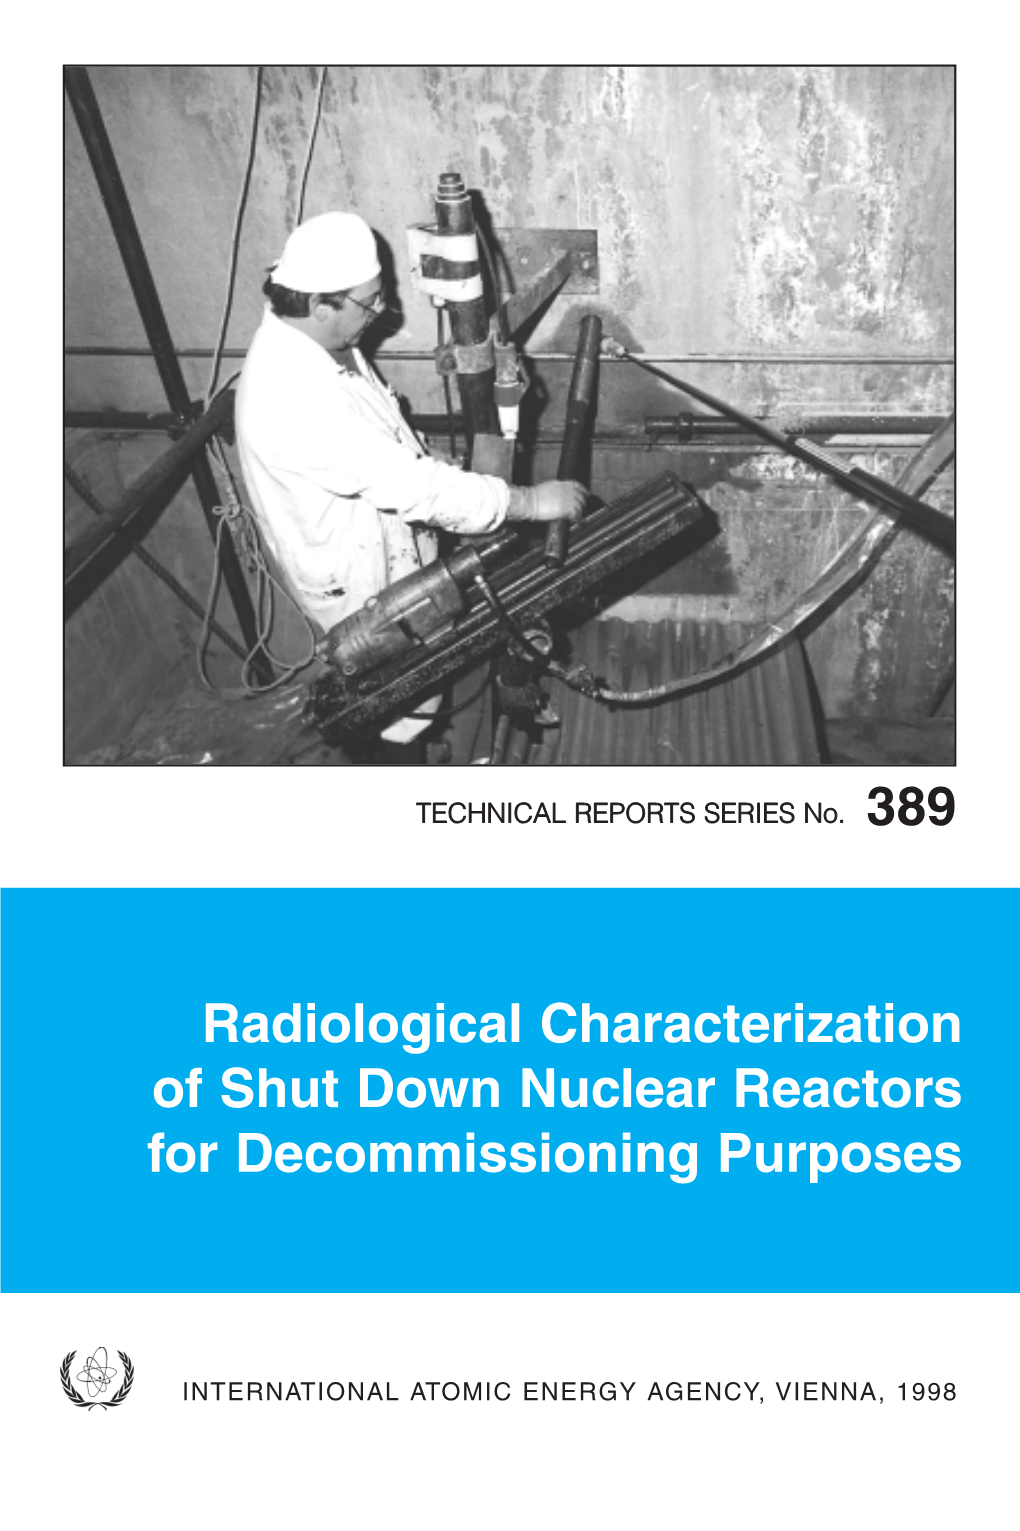 Radiological Characterization of Shut Down Nuclear Reactors